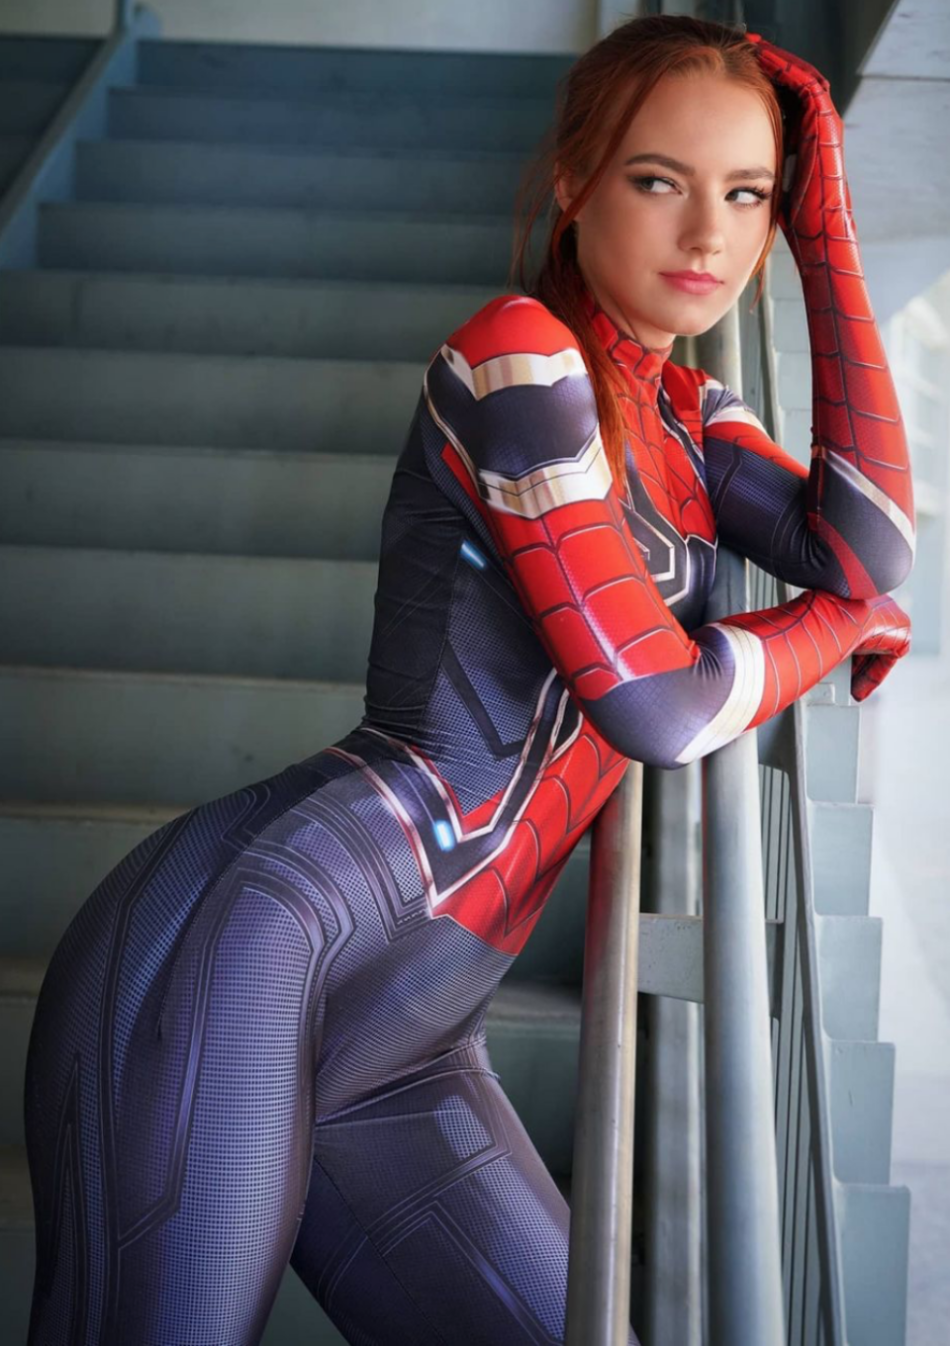 Sexy Red Hot Cosplay Girls Spiderman Women Best Photo Compilation 2021 (89 HQ Photos) 228